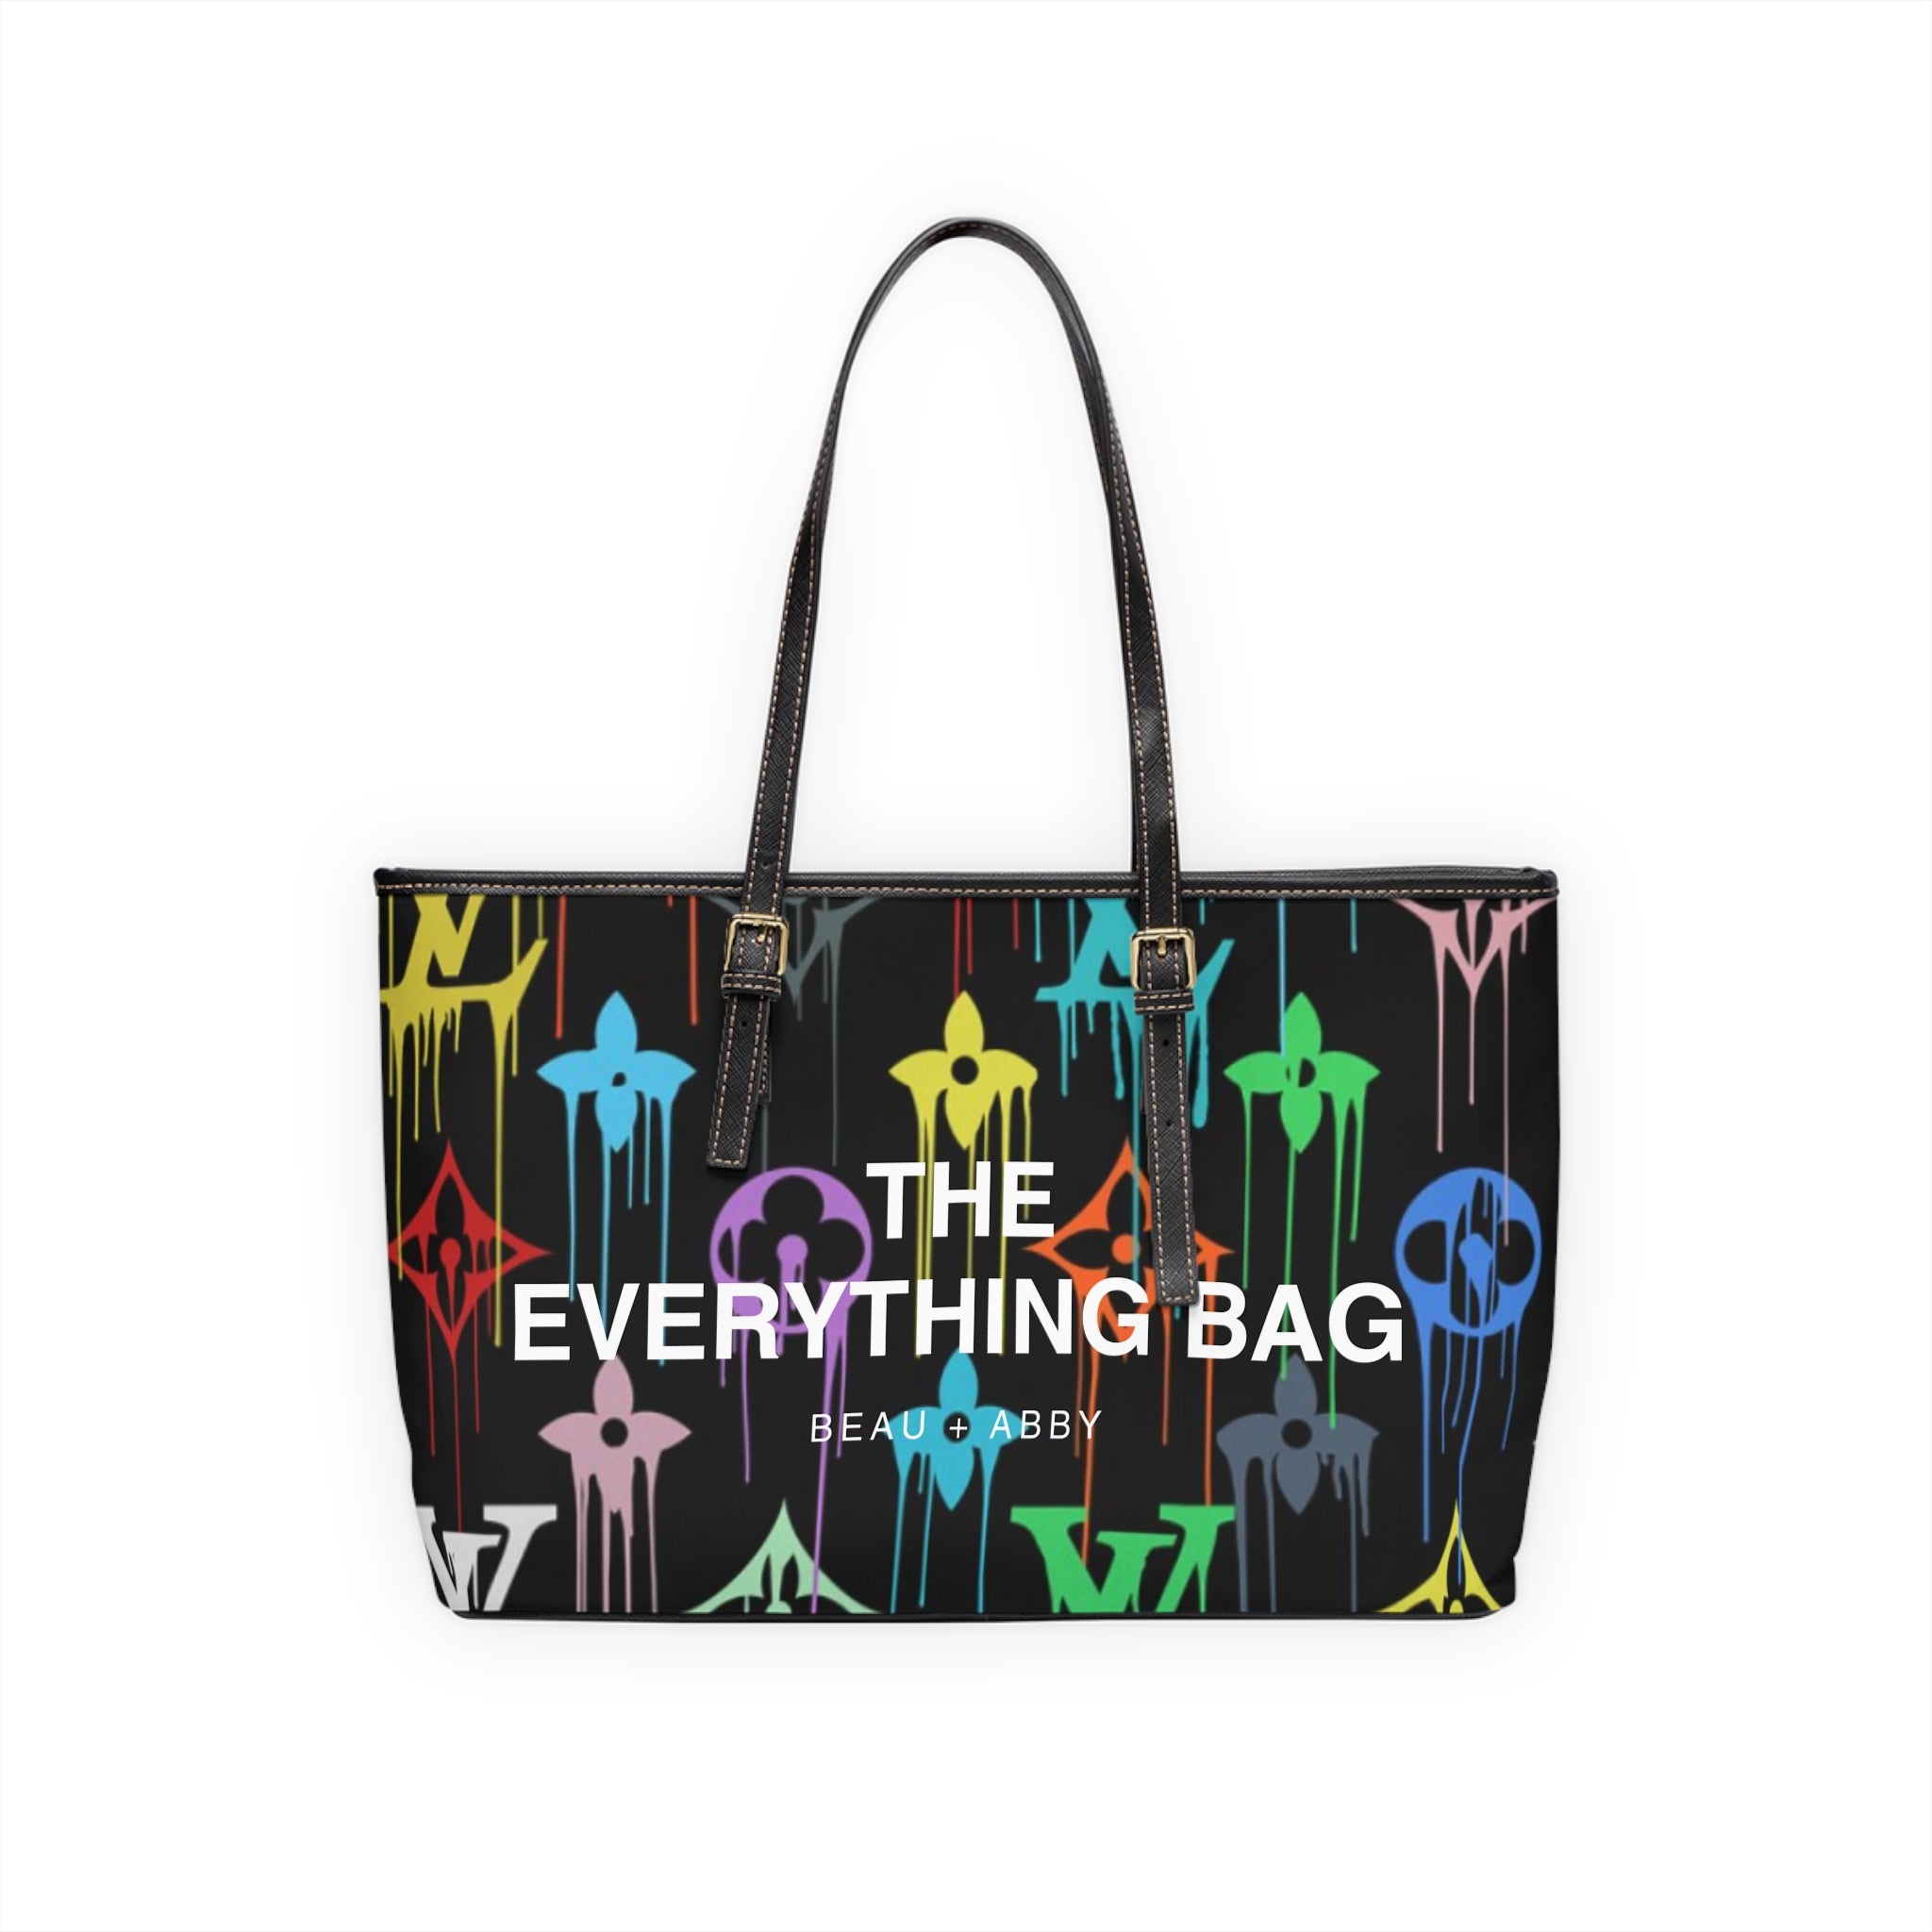 Casual Wear Accessories "Everything Bag" in Multicolour Paint Icons PU Leather Shoulder Bag in Taupe, Tote Bag